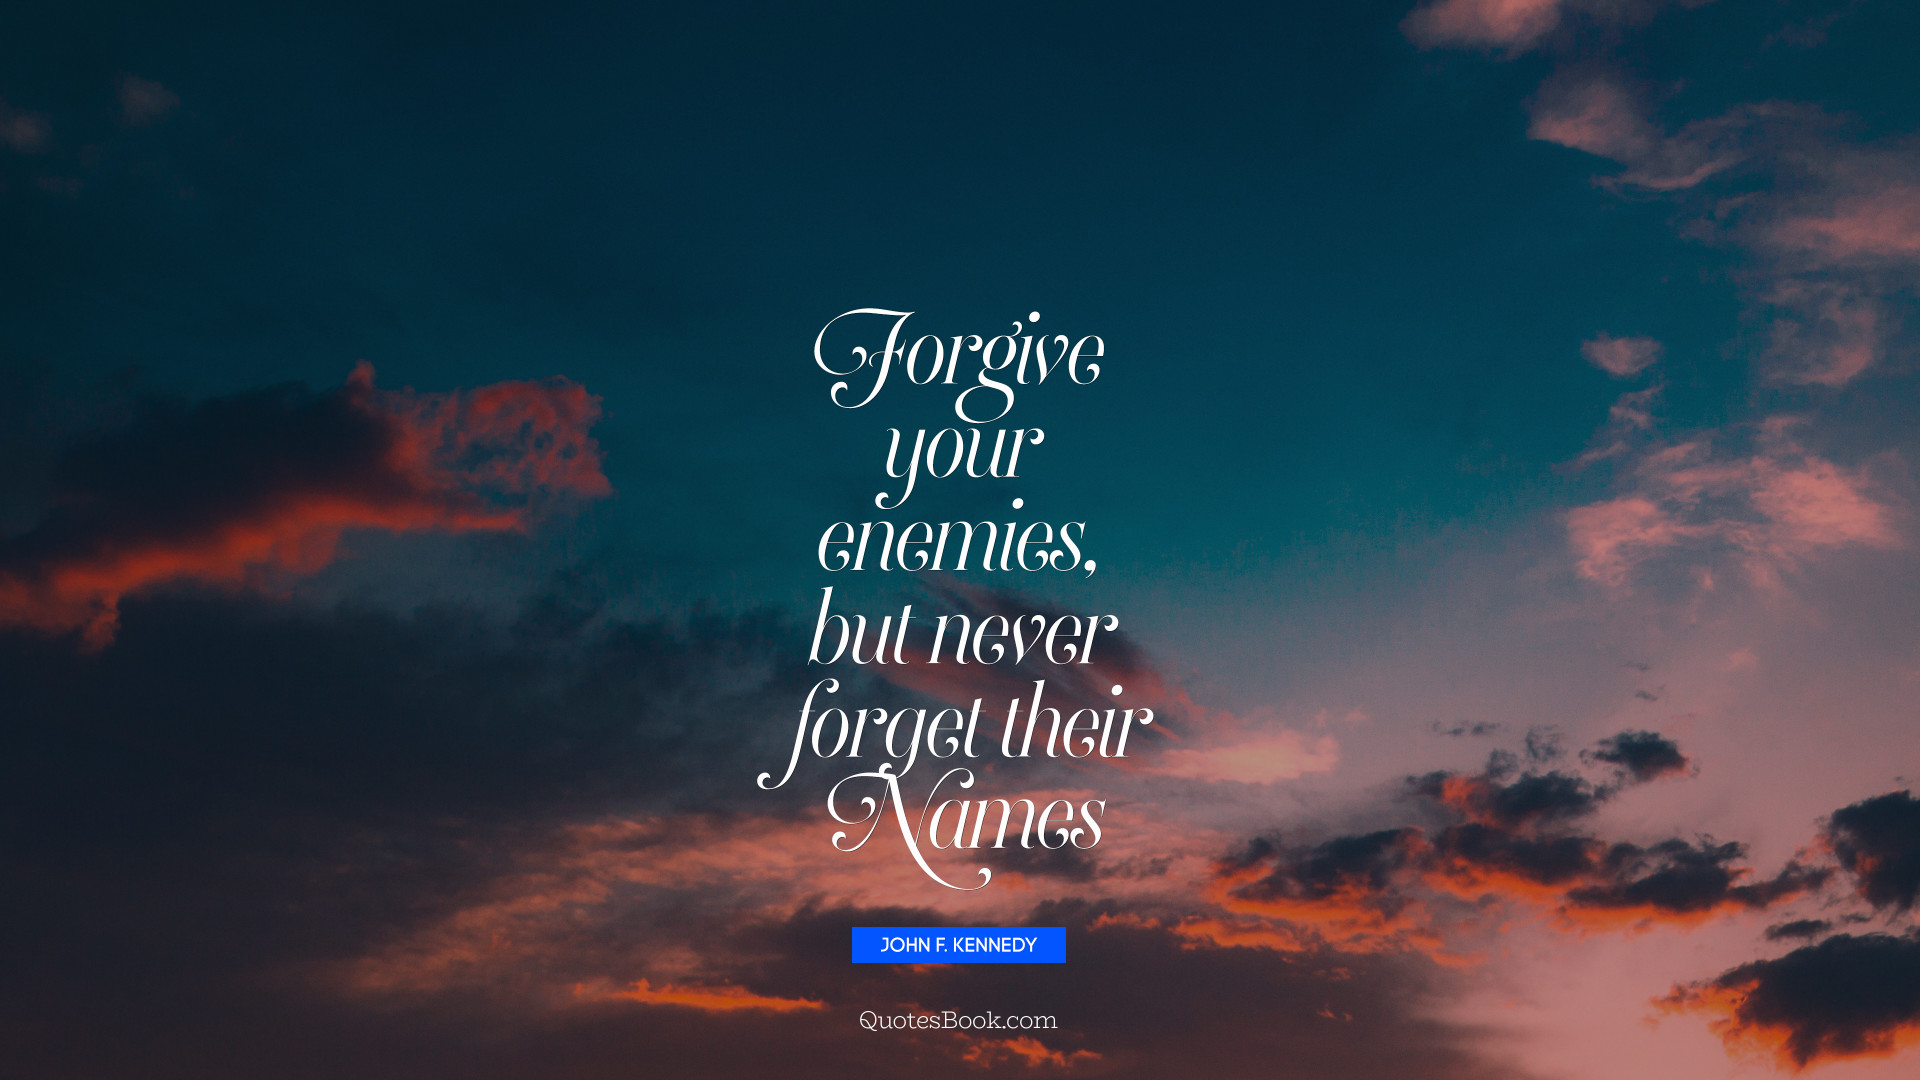 Forgive your enemies, but never forget their names. - Quote by John F